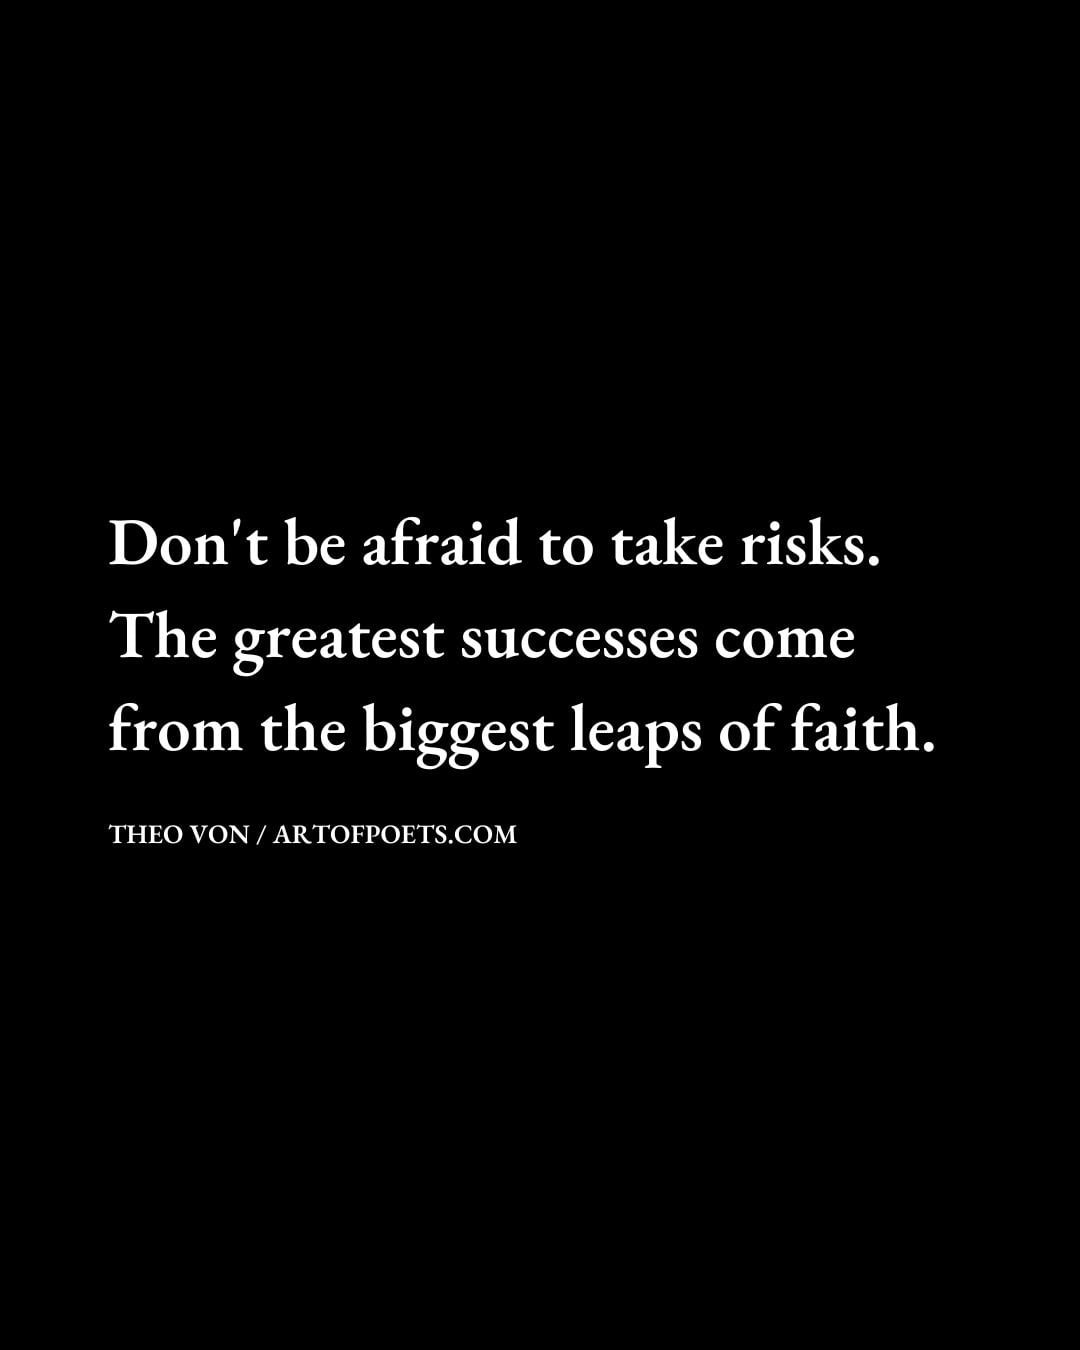 Dont be afraid to take risks. The greatest successes come from the biggest leaps of faith